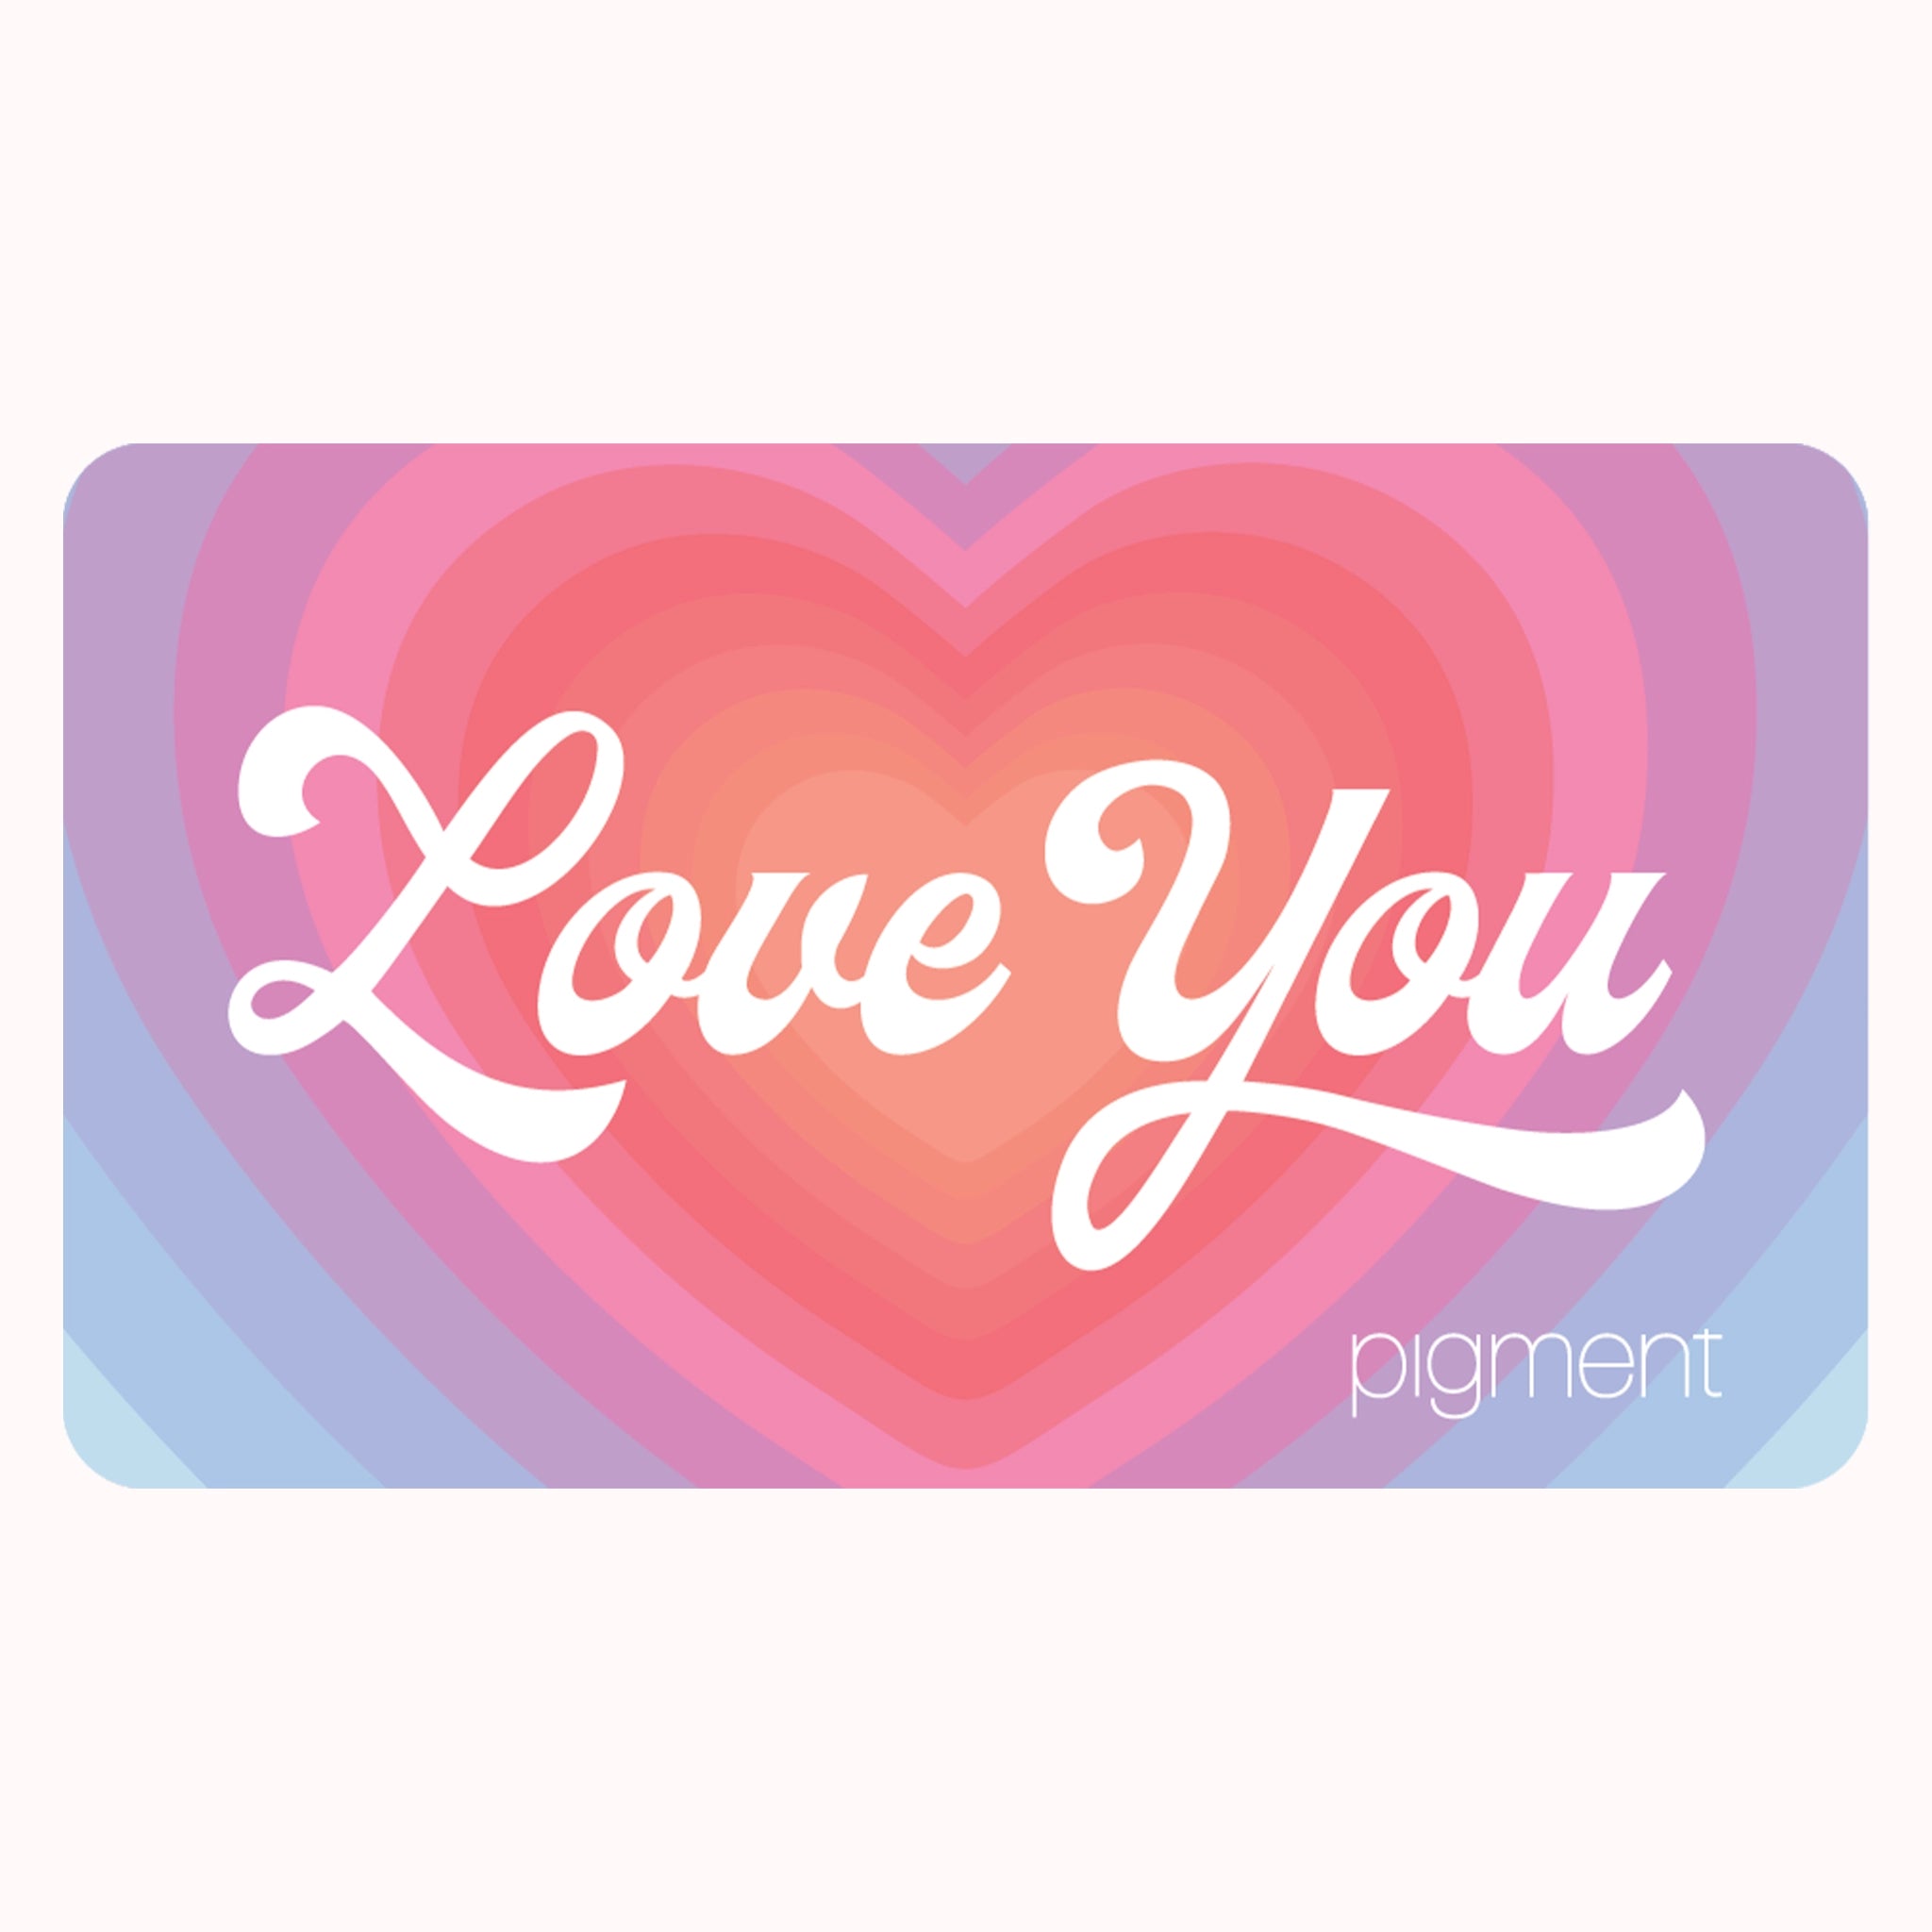 On a white background is a pink, purple and red gradient heart gift card with white text in the center that reads, &quot;Love You&quot; along with much smaller letters in the bottom right corner that reads, &quot;Pigment&quot;.